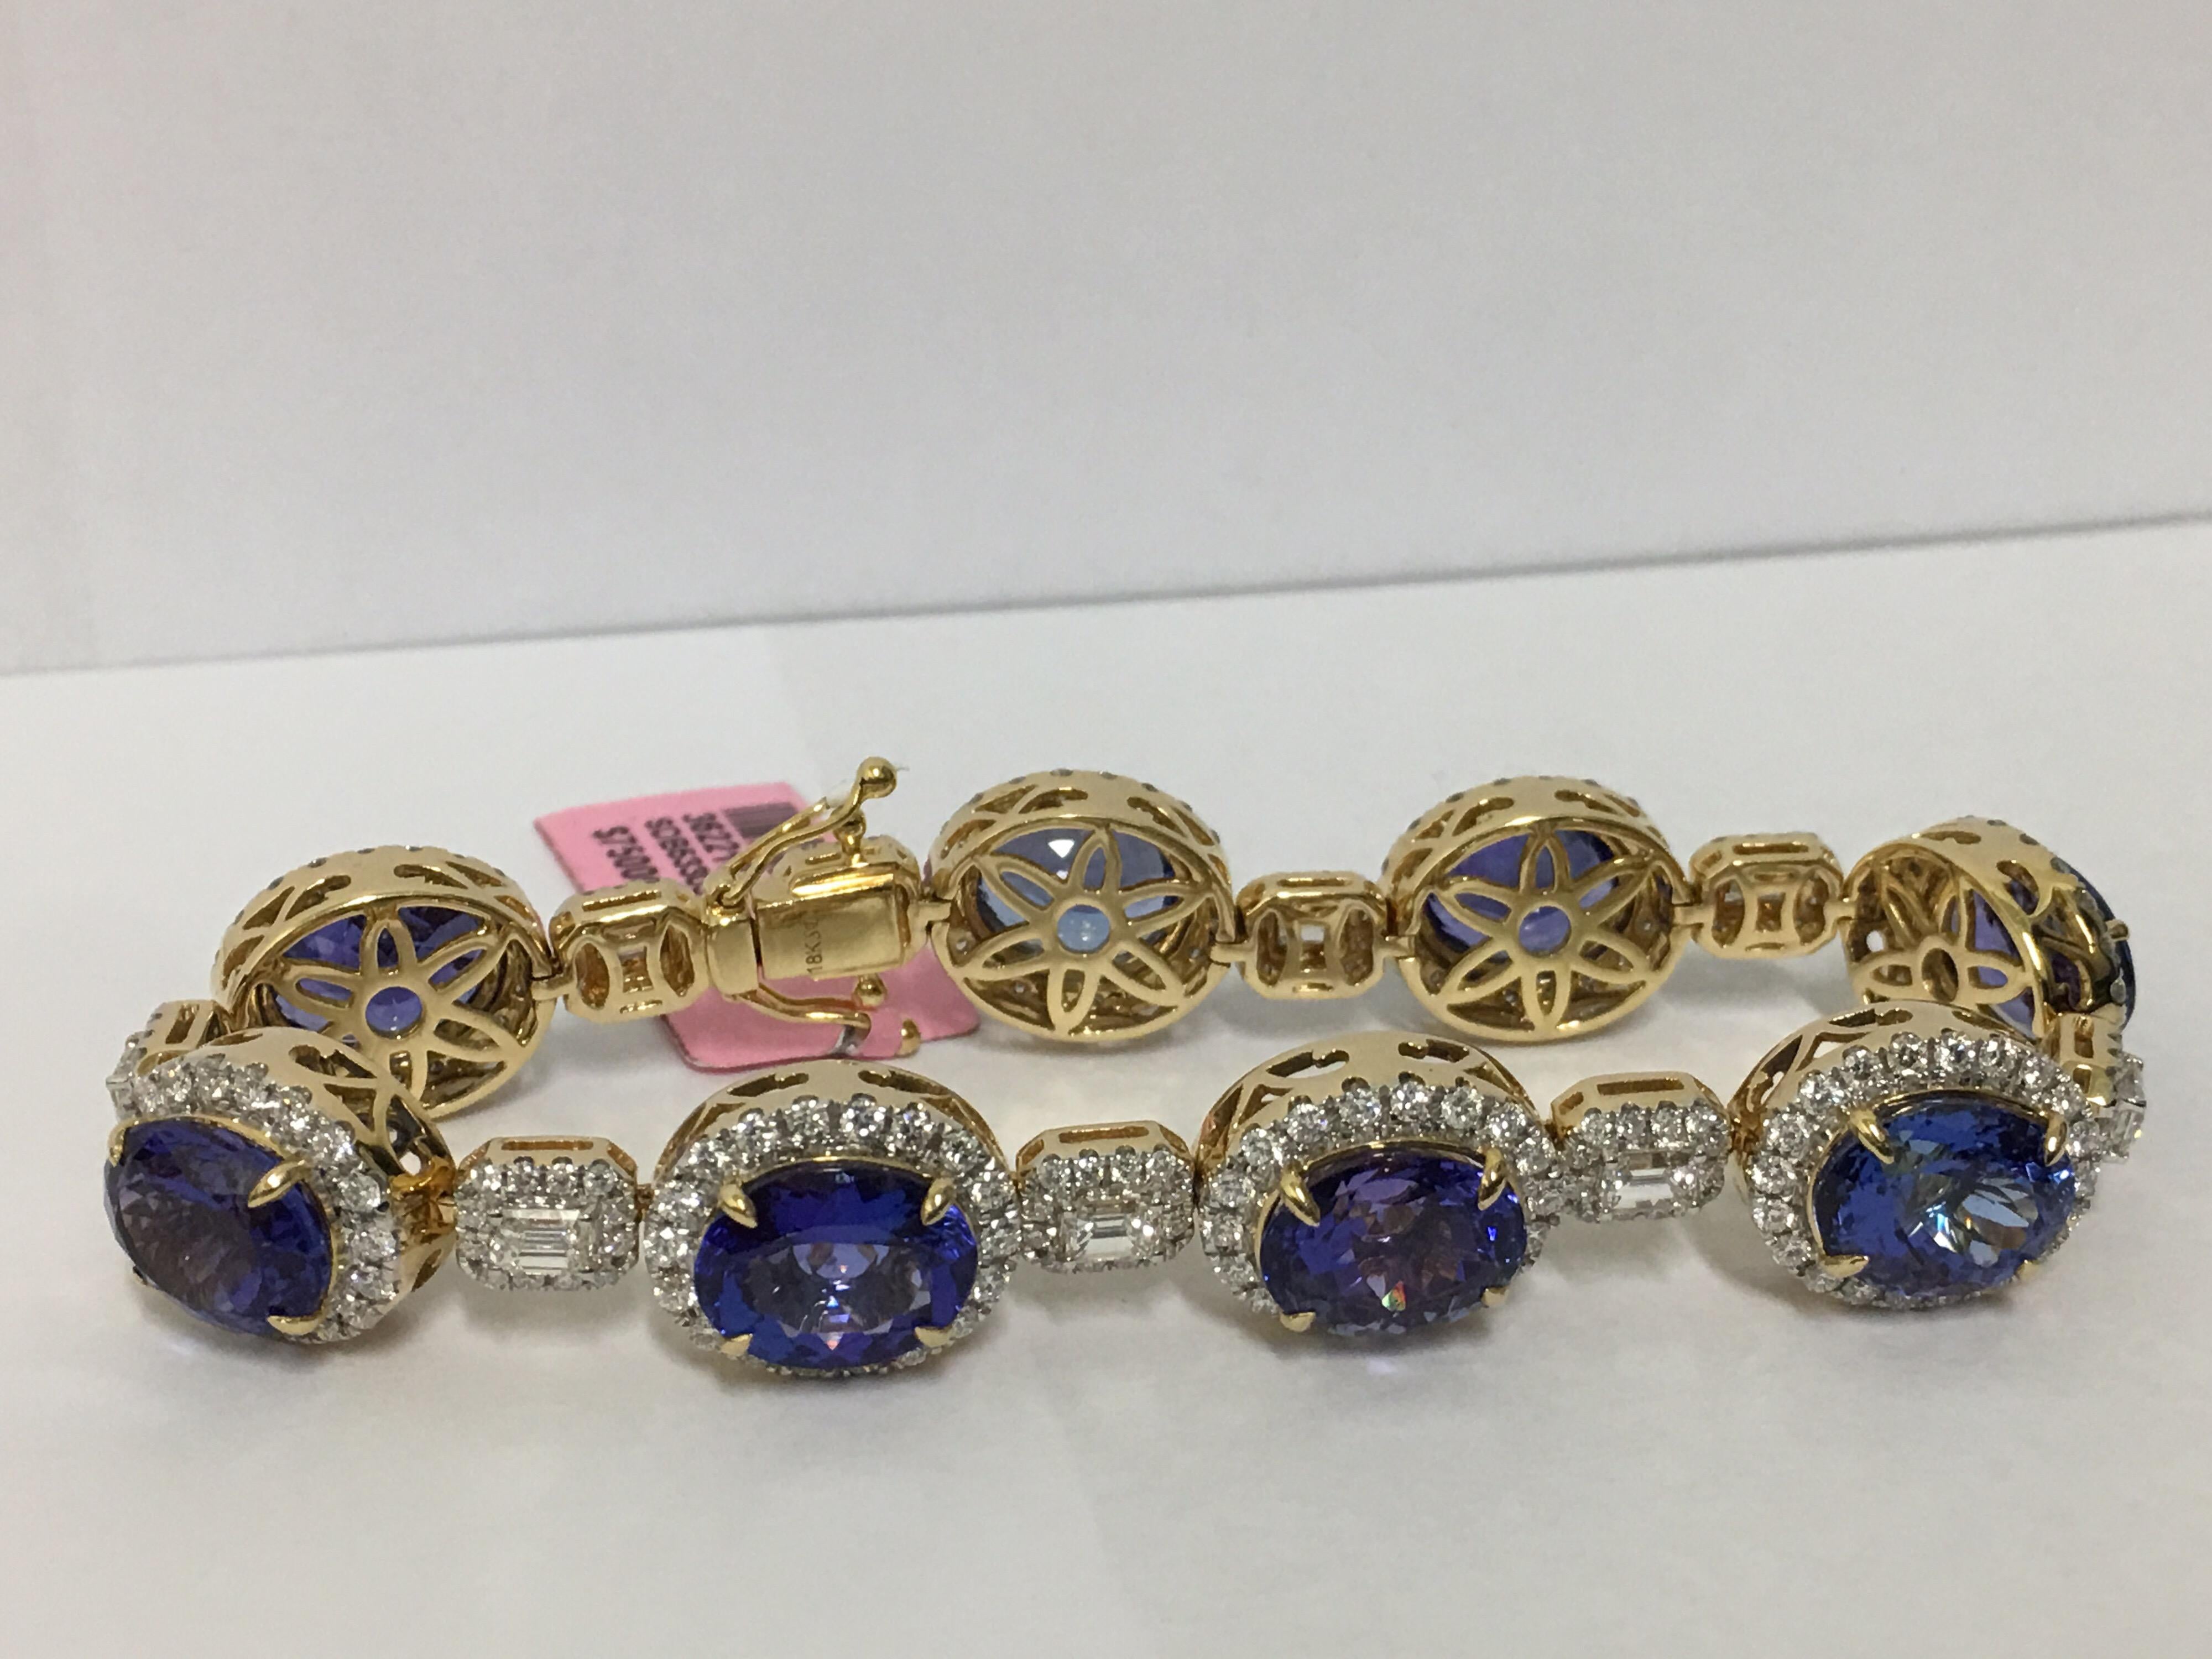 All matched AAA Royal Blue Ink Color Tanzanite is hand made one of a kind Bracelet
The Bracelet is made out of  31.92 Carat Tanzanite and 5.73 Round and Emerald Cut In between.
The Bracelet is made of of 18 Karat yellow Gold.